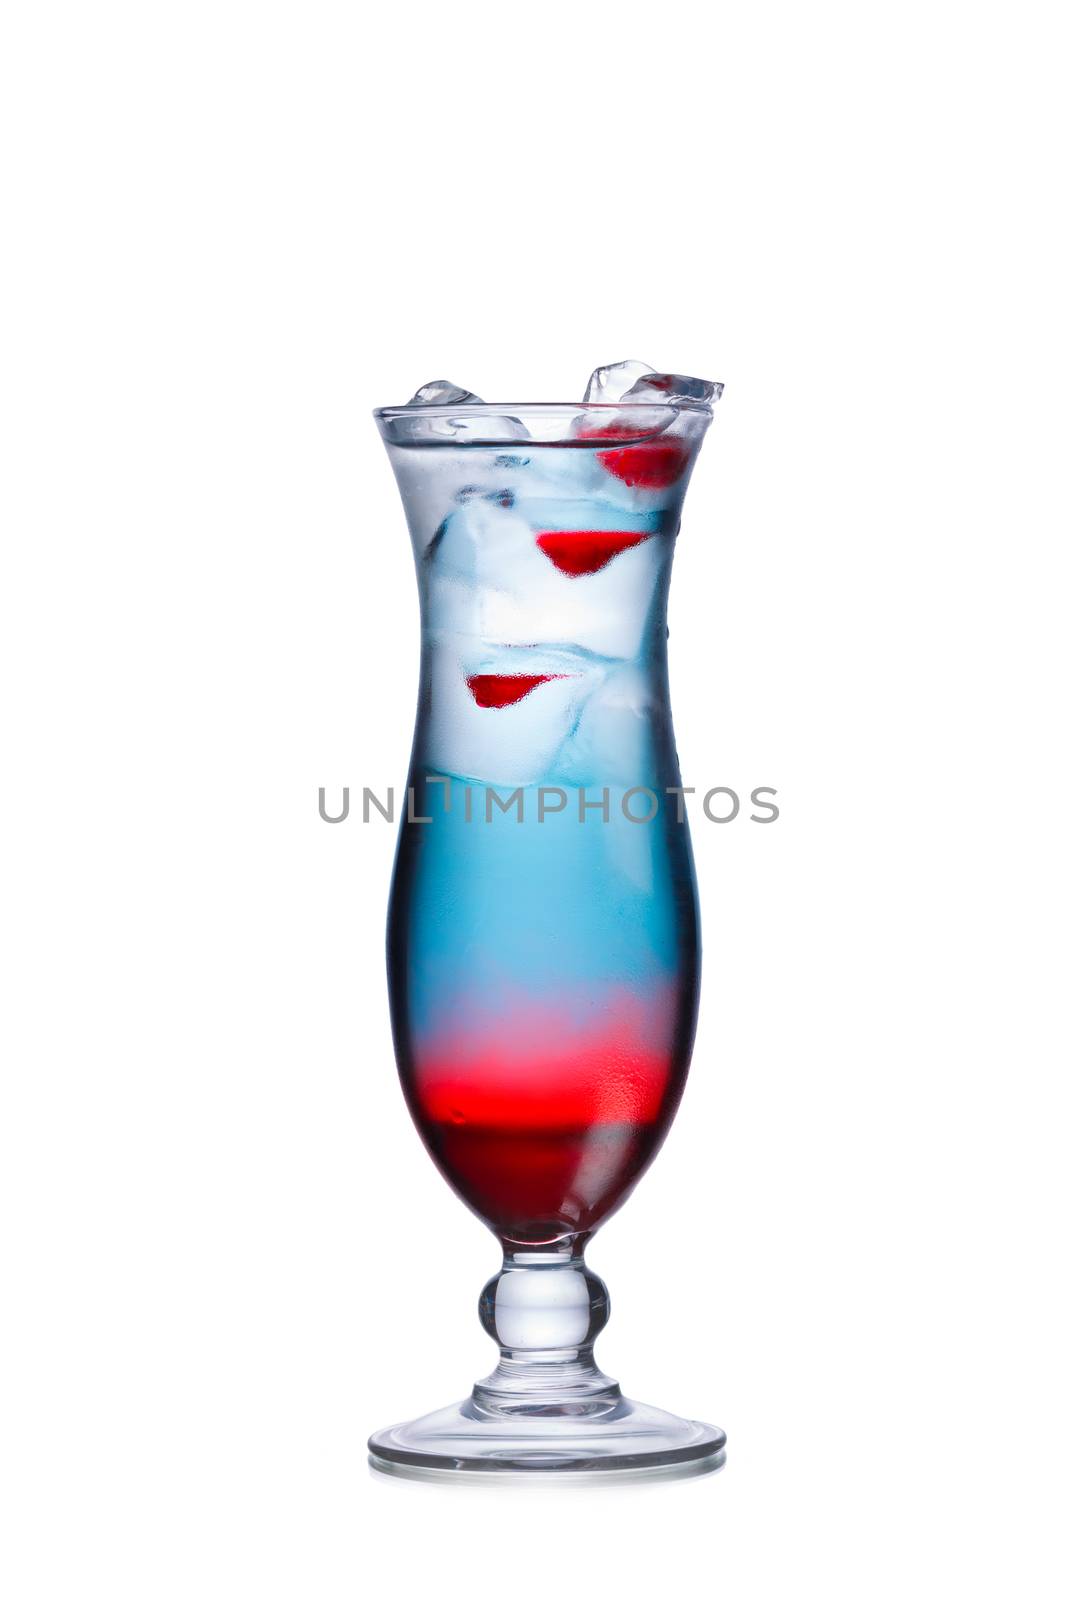 Patriotic layered alcoholic cocktail in hurricane glass